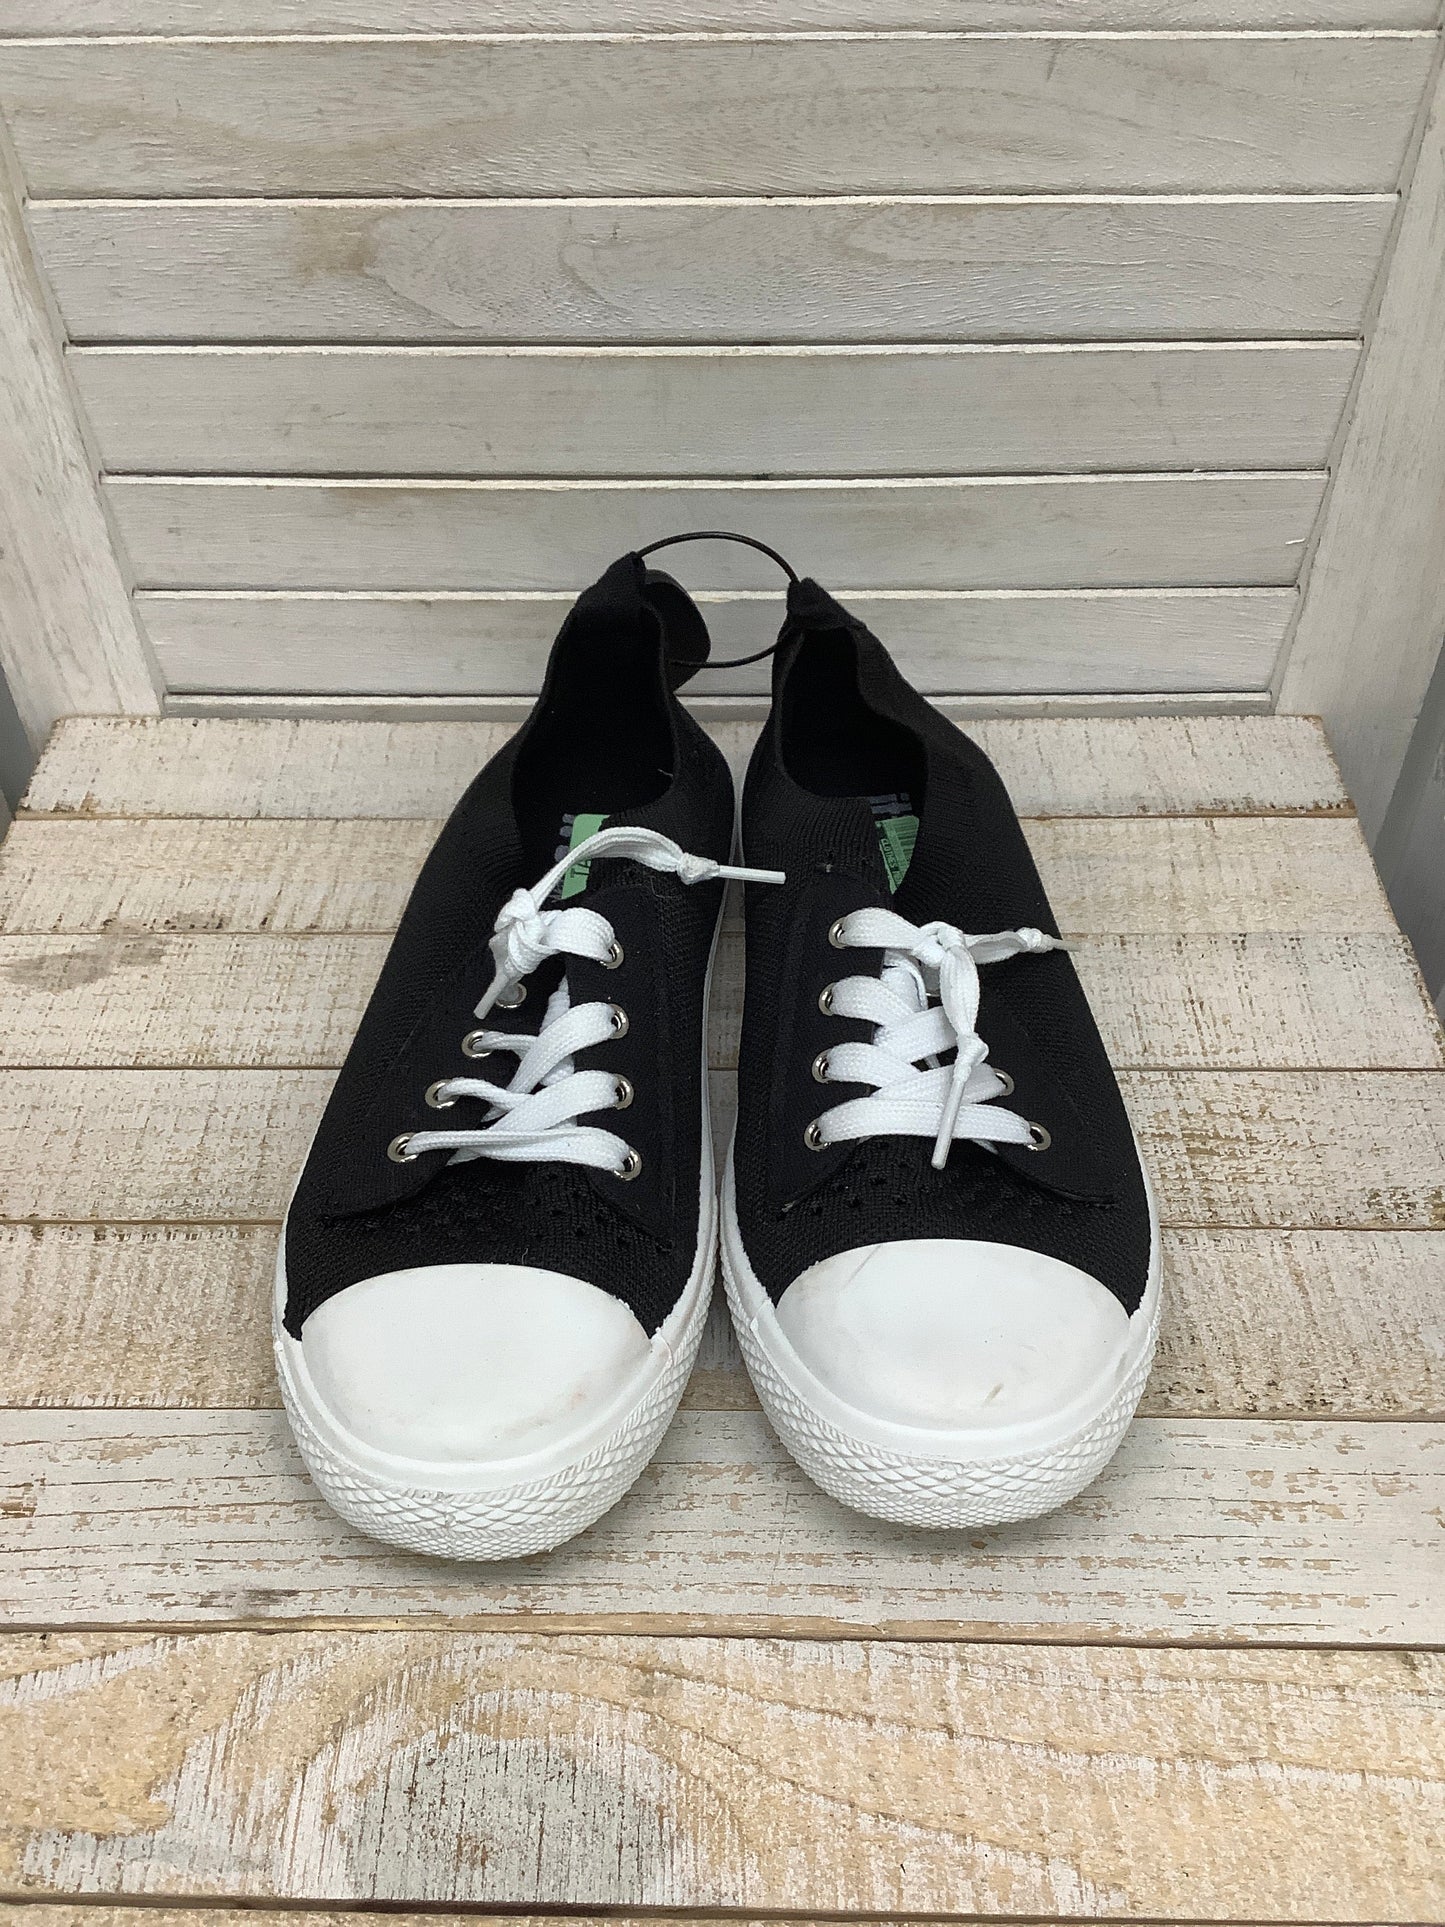 Black Shoes Sneakers Clothes Mentor, Size 8